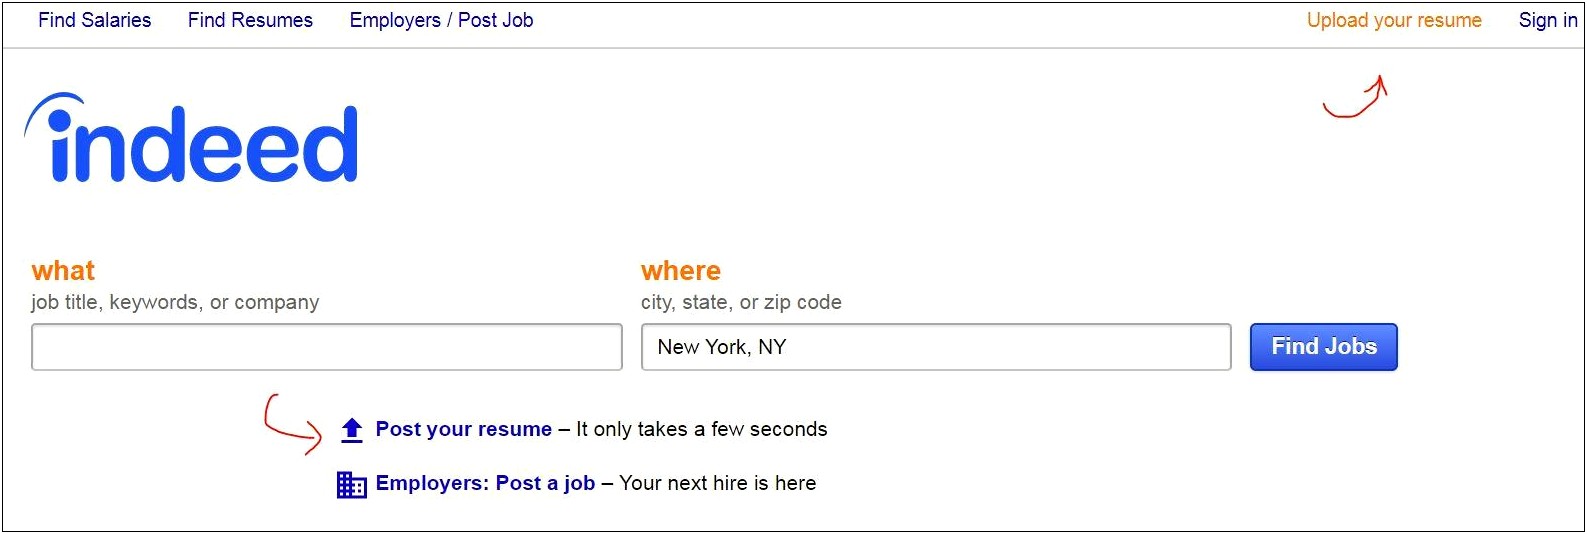 Indeed Resume Does Not Match The Job Category